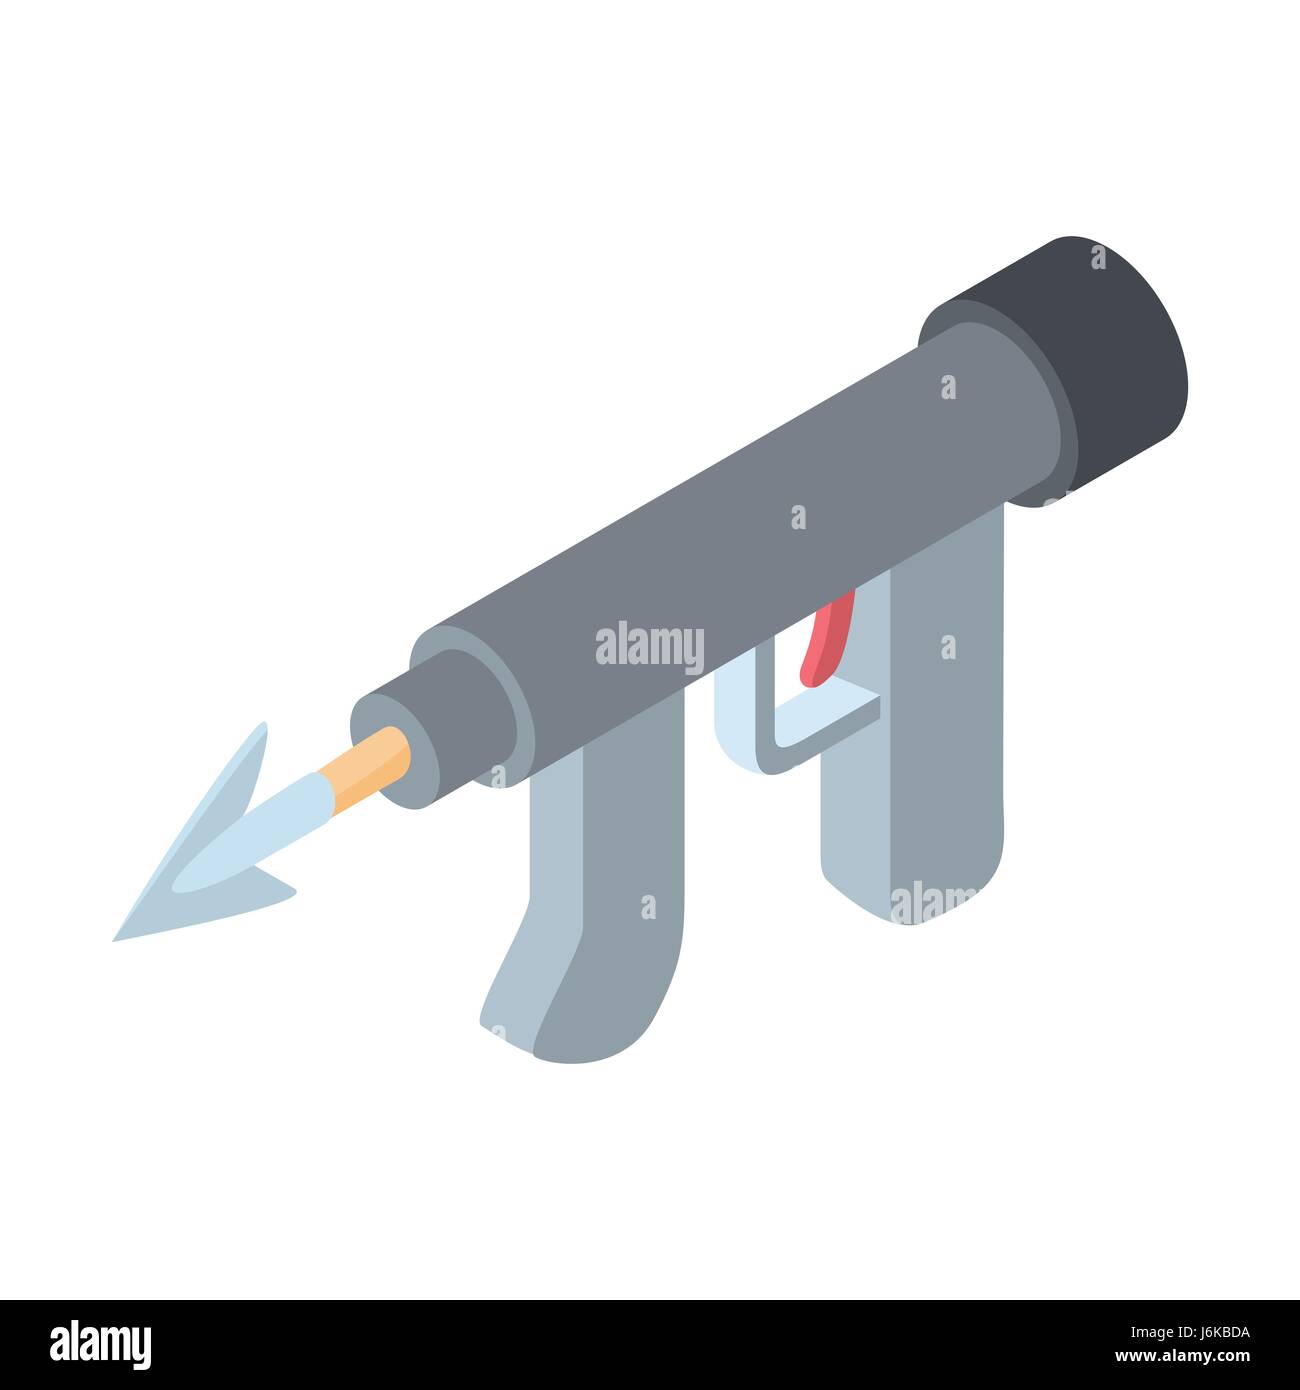 Spear gun speargun fishing weapon Stock Vector Images - Alamy